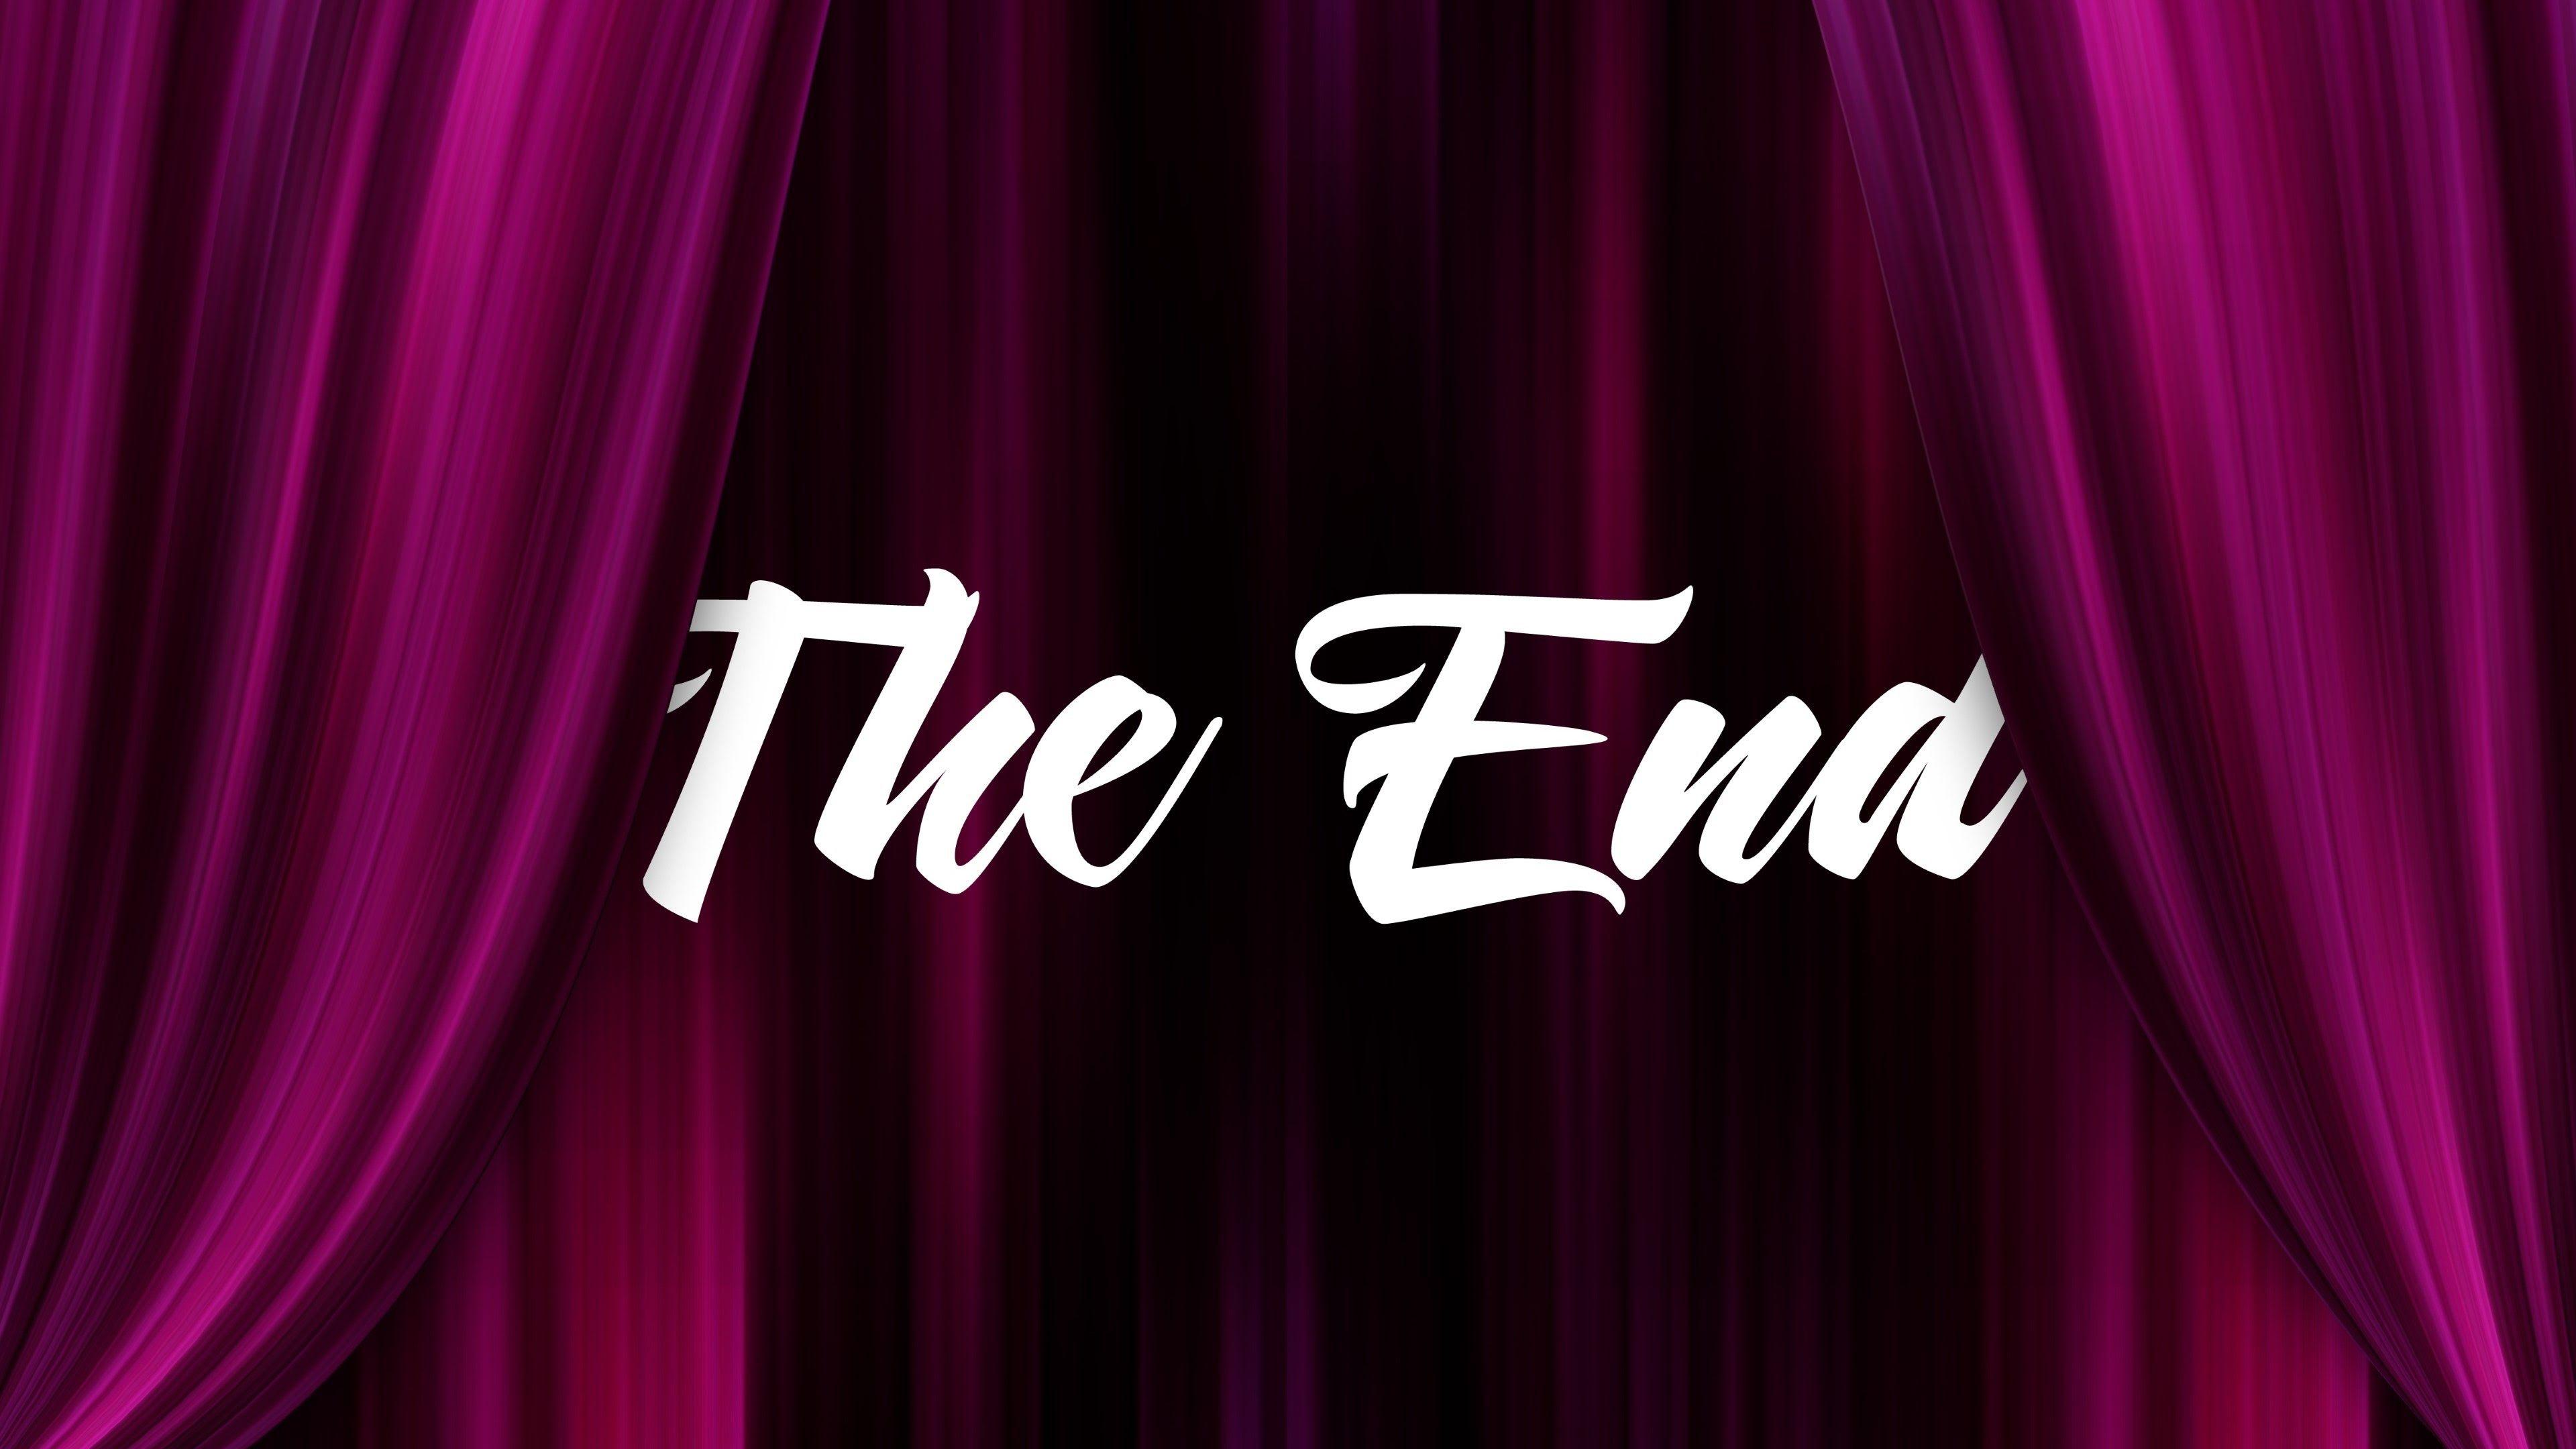 The End 4K Ultra Wallpaper Free The End 4K Ultra